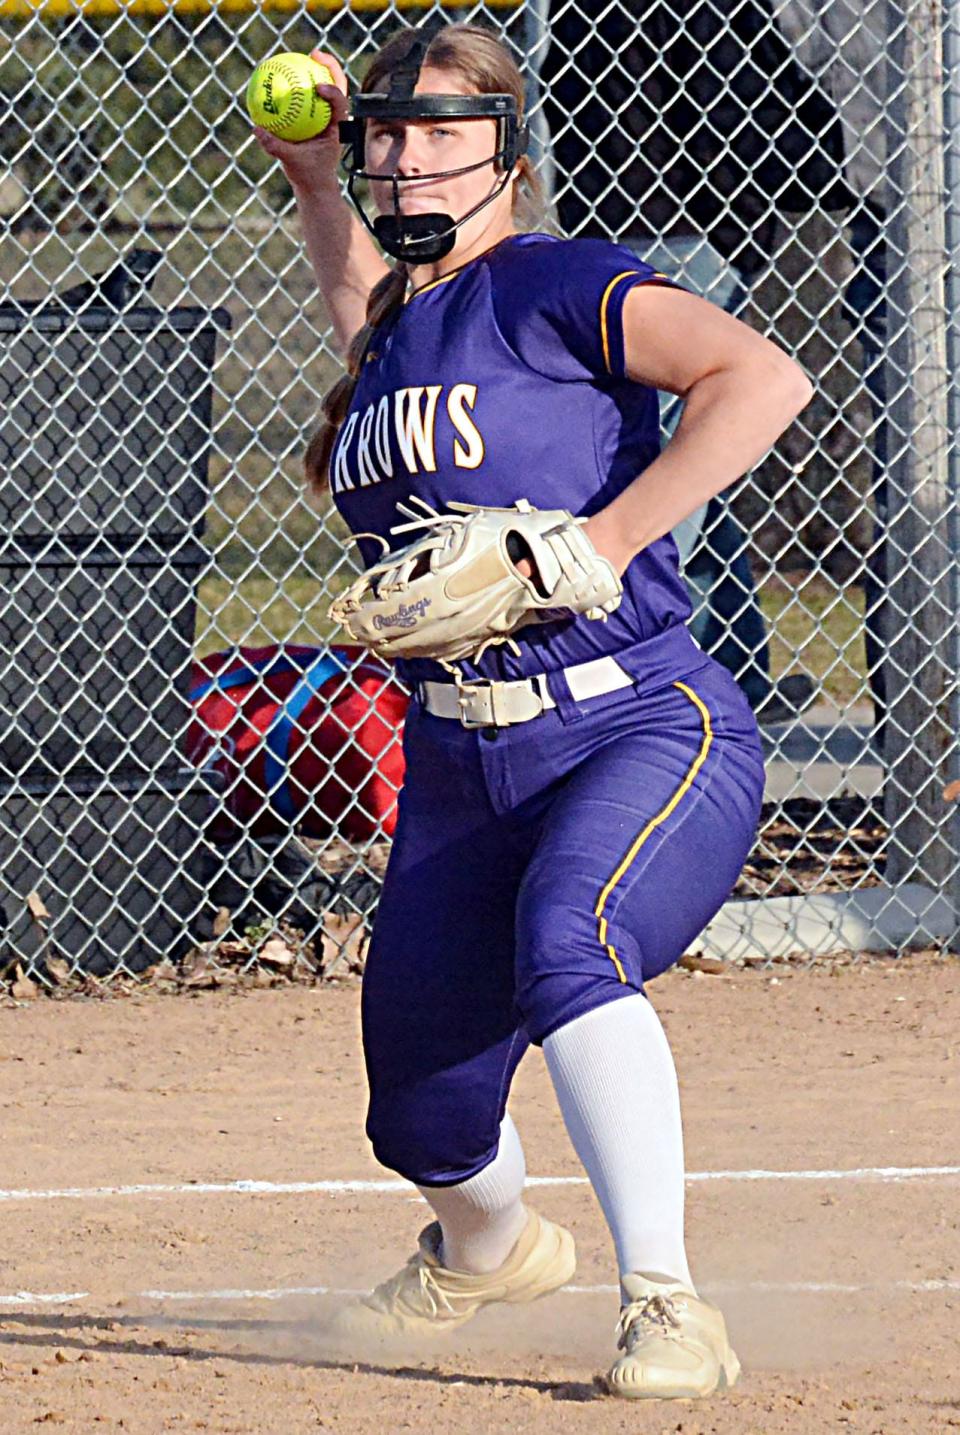 Watertown third baseman Jade Lund gets ready to fire to first base after fielding a grounder during a high school softball game against Sioux Falls Jefferson on Monday, April 24, 2023 at Koch Complex in Watertown.